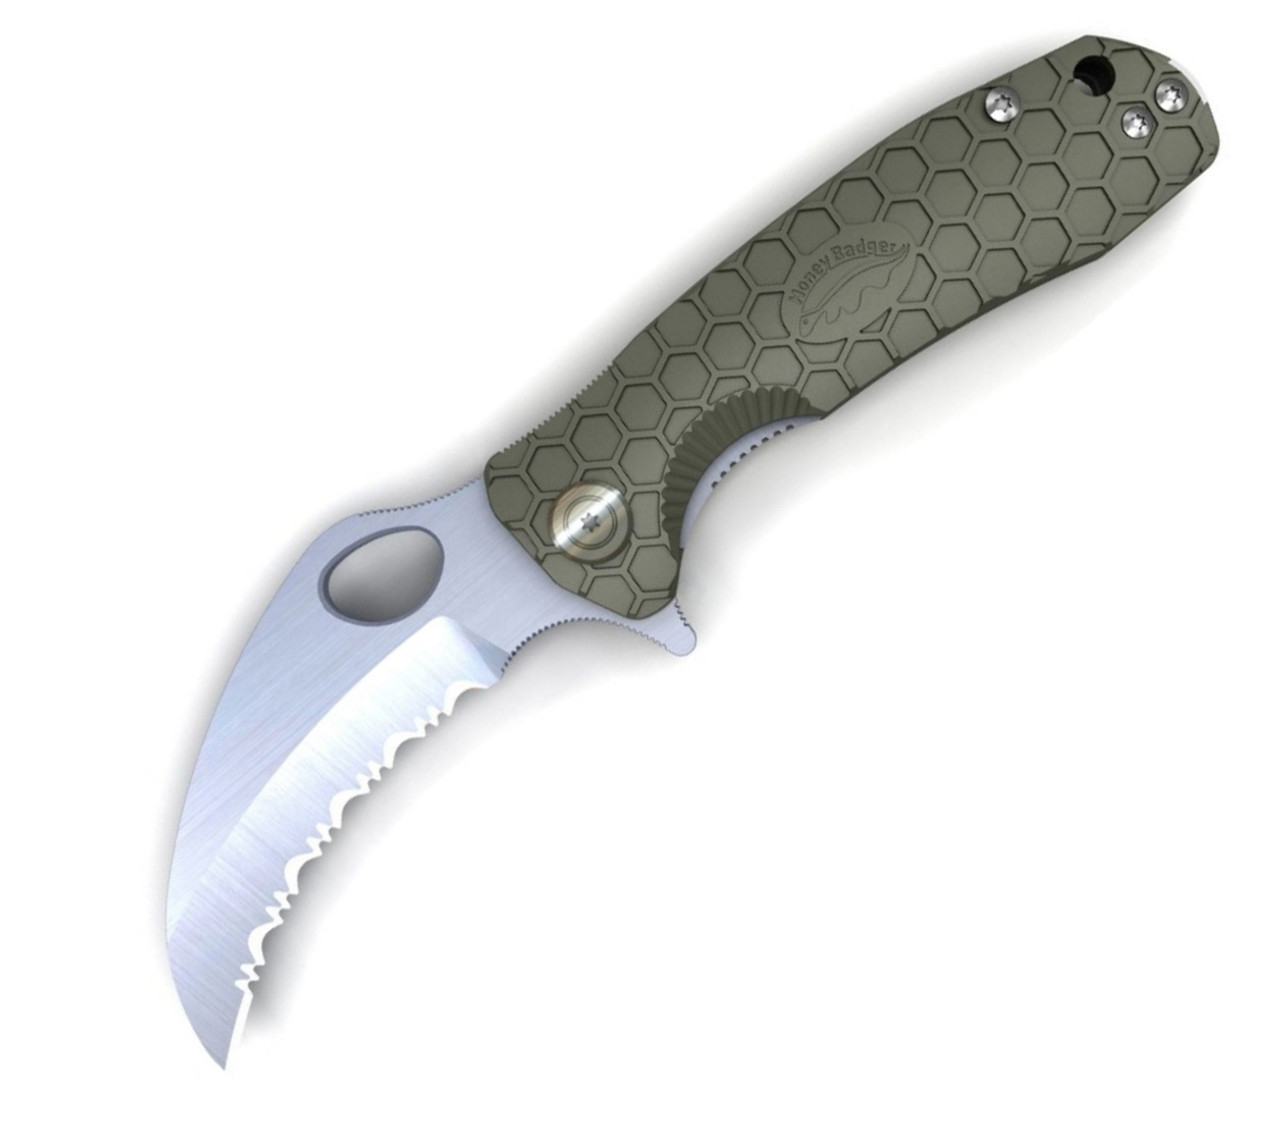 Honey Badger Knives Small Claw Flipper HB1153, 2.75" 8Cr13Mov Claw Serrated Blade, Green FRN Handle